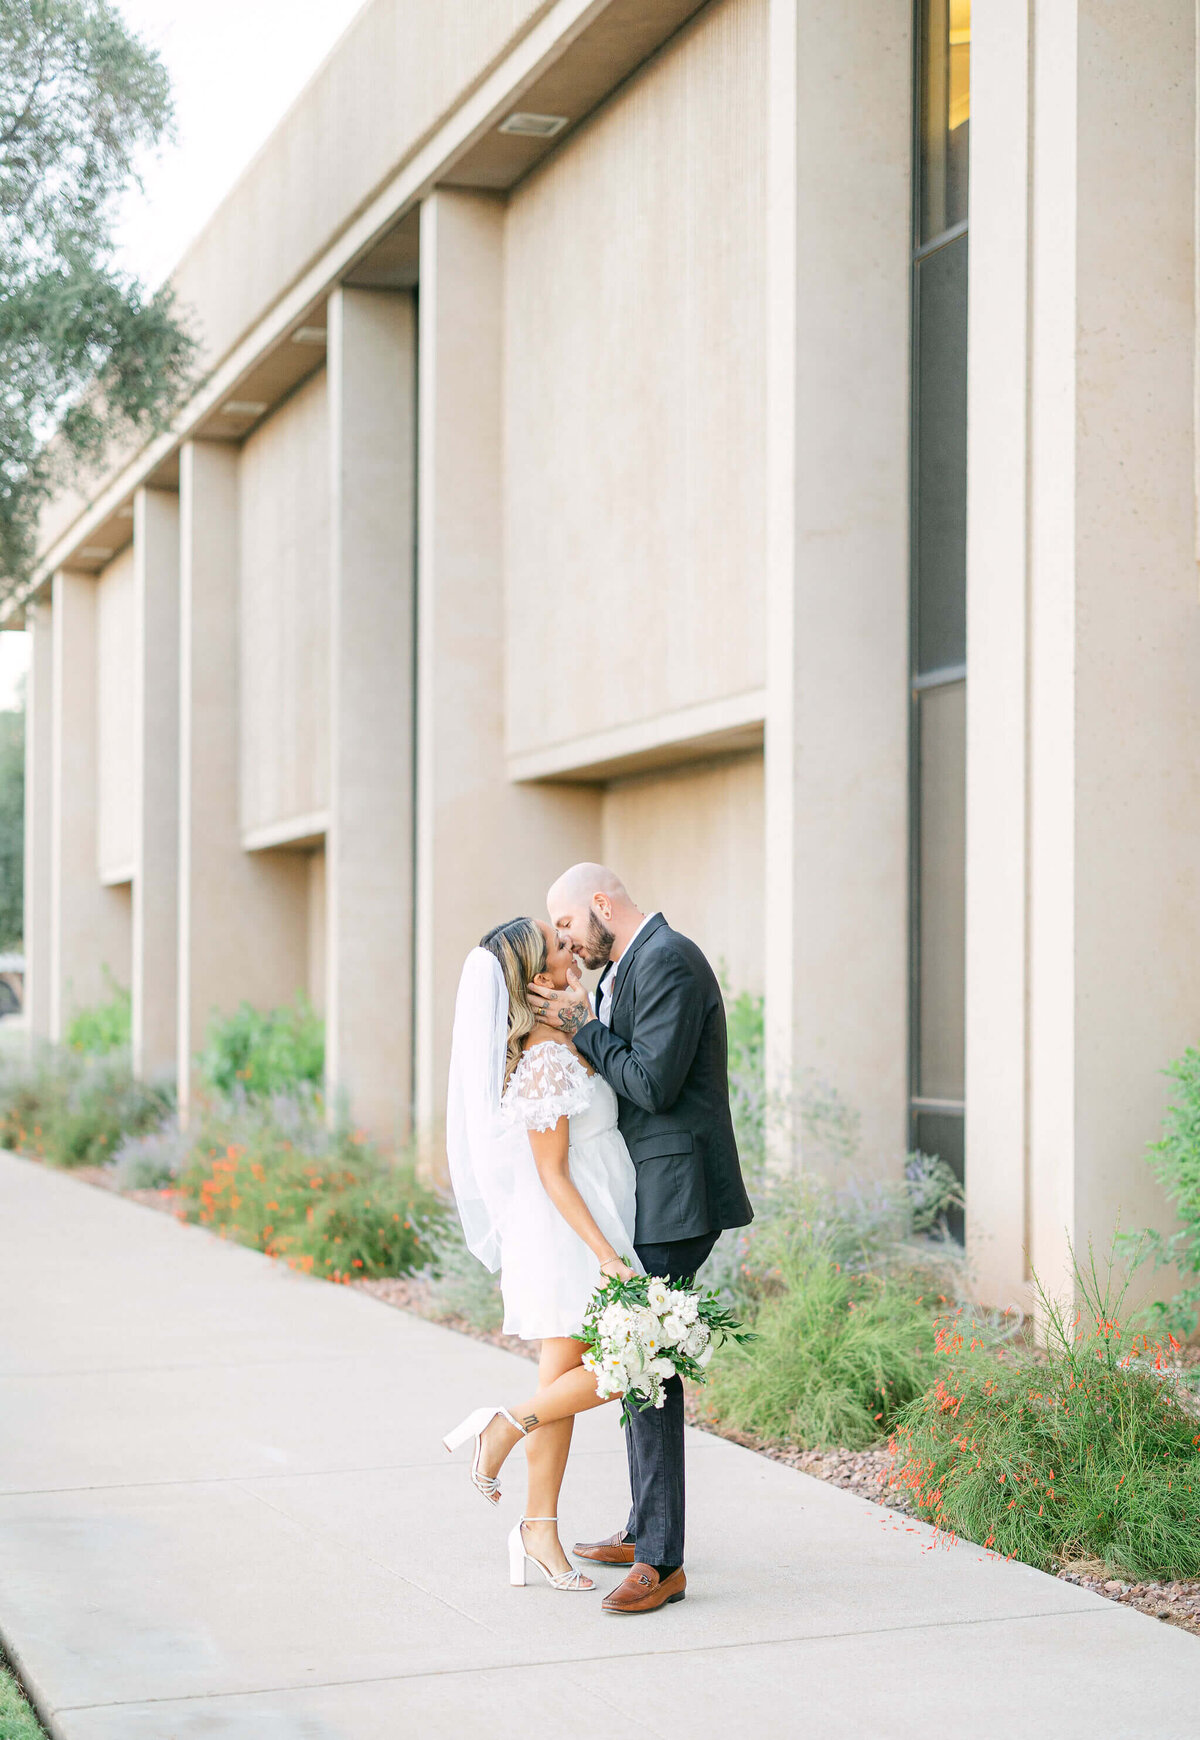 The bride and groom share a tender kiss during their downtown Phoenix elopement photo session.